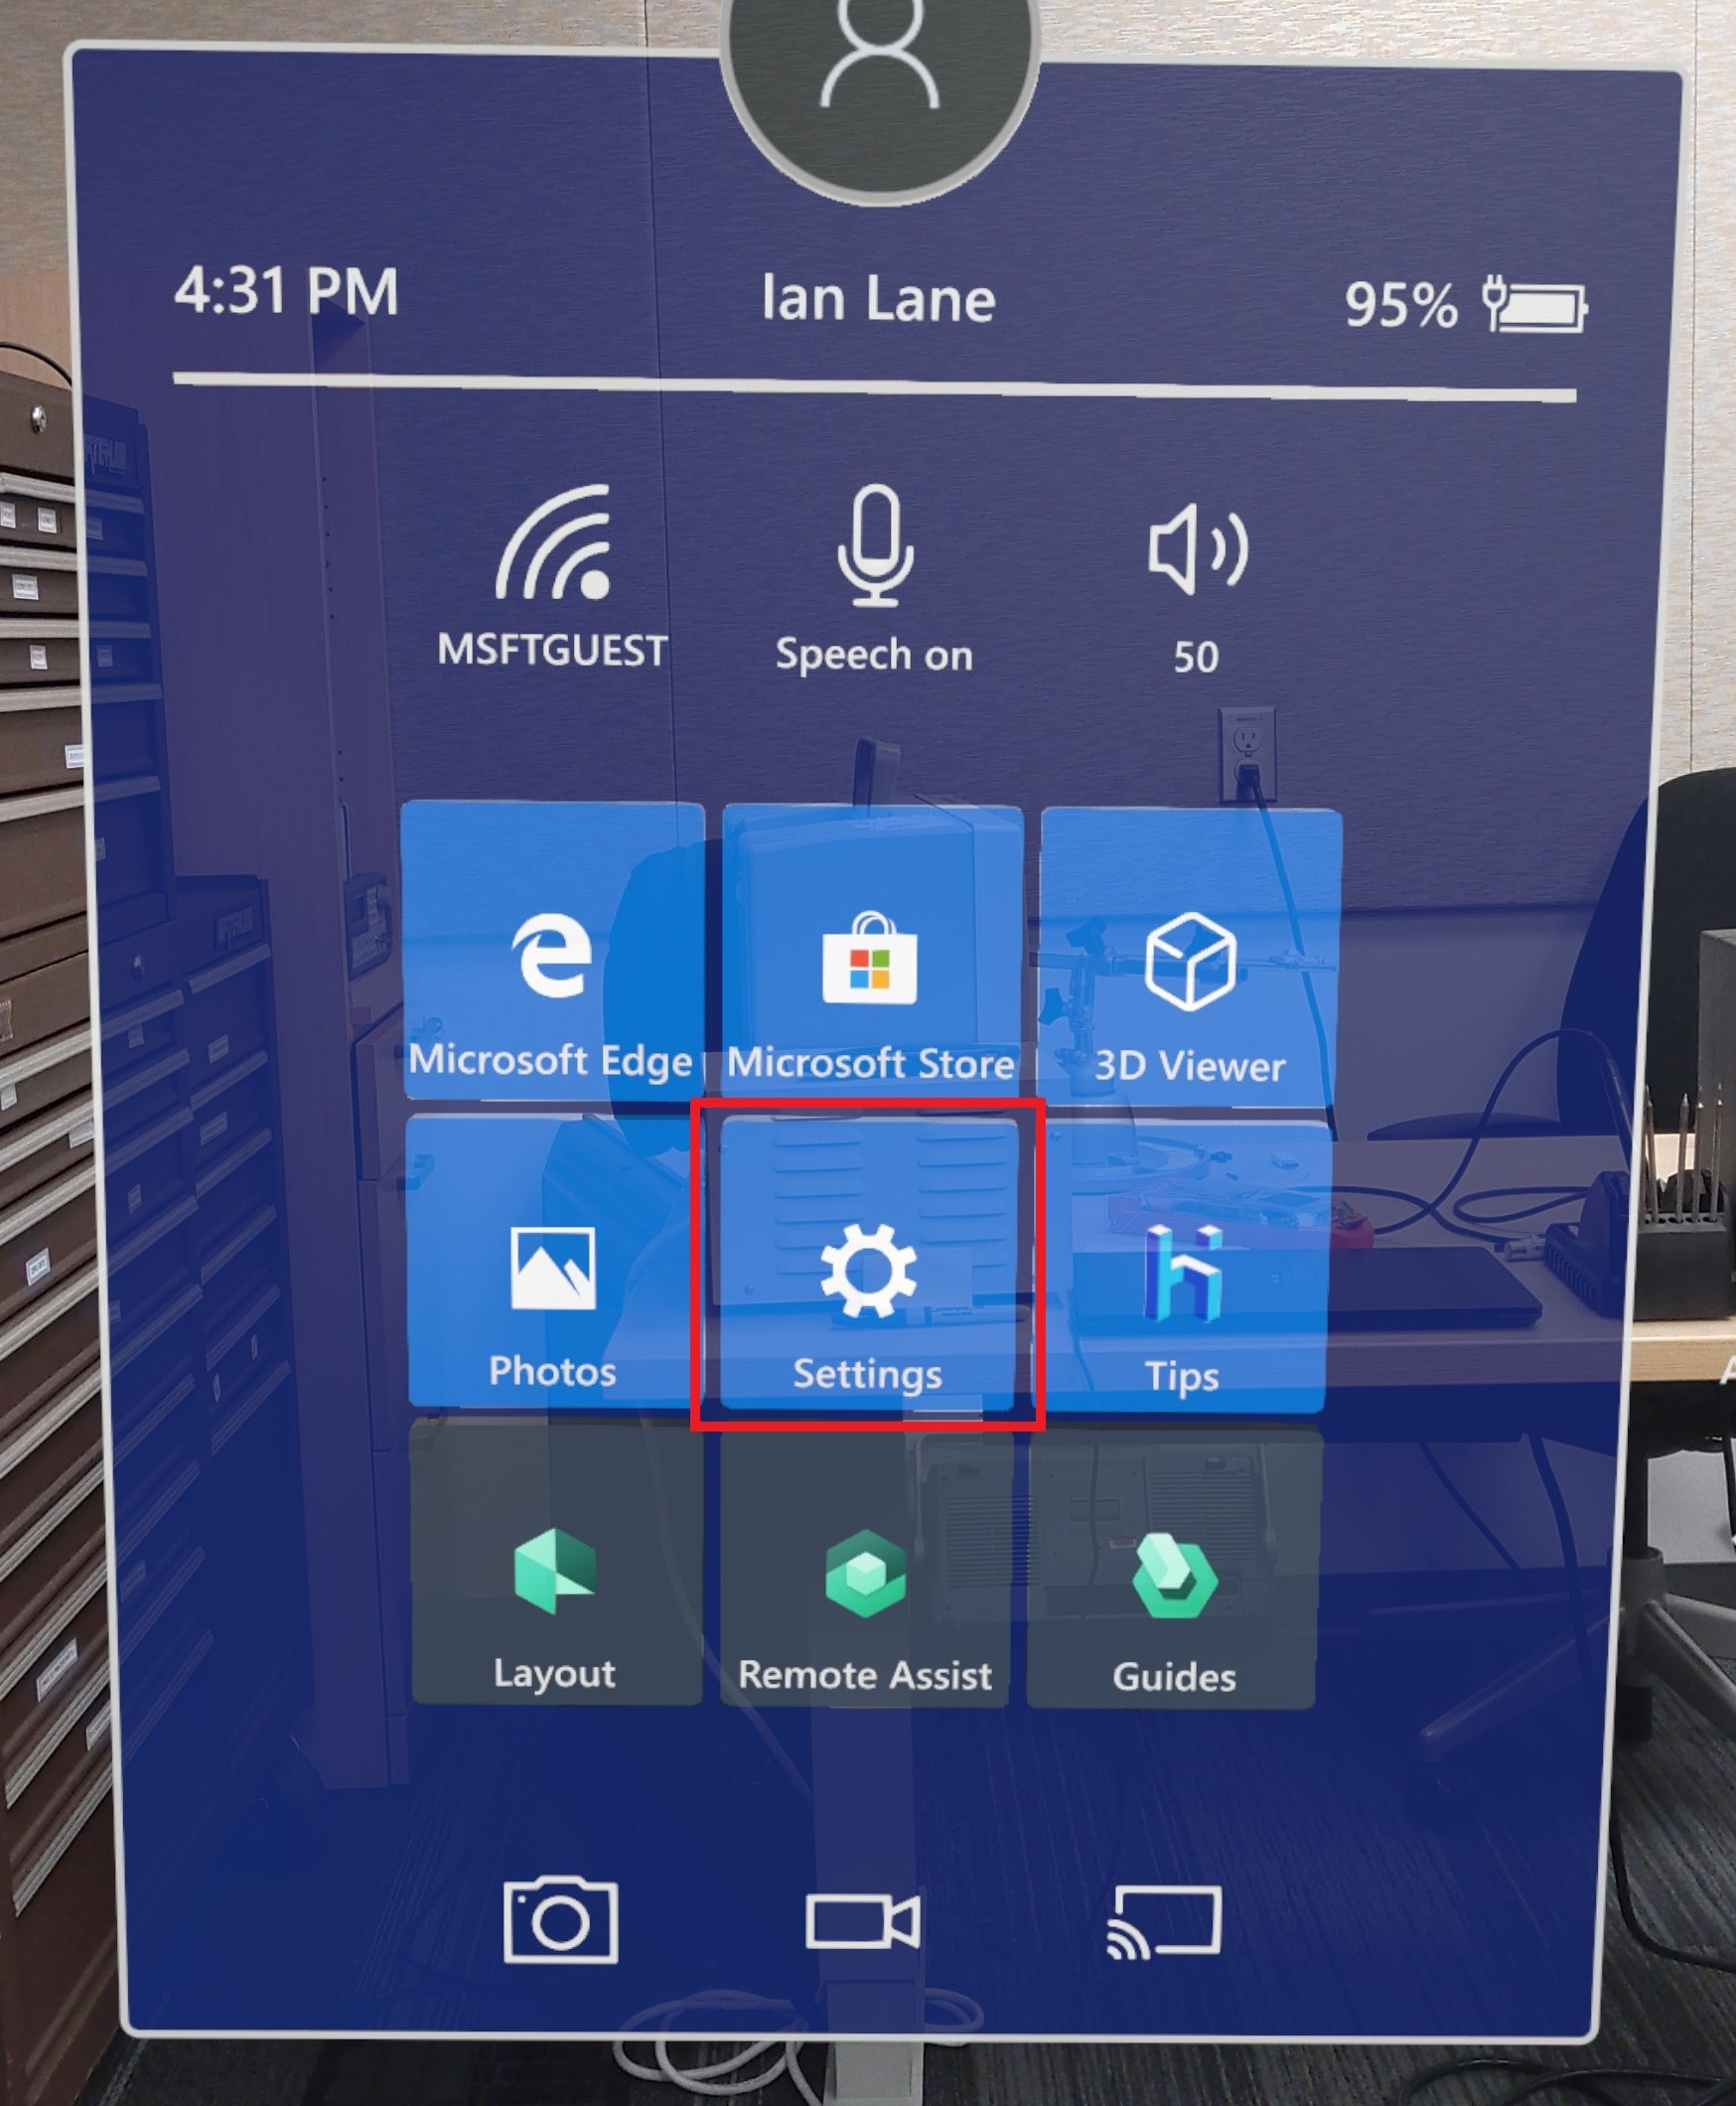 Screenshot of the HoloLens menu with settings button highlighted